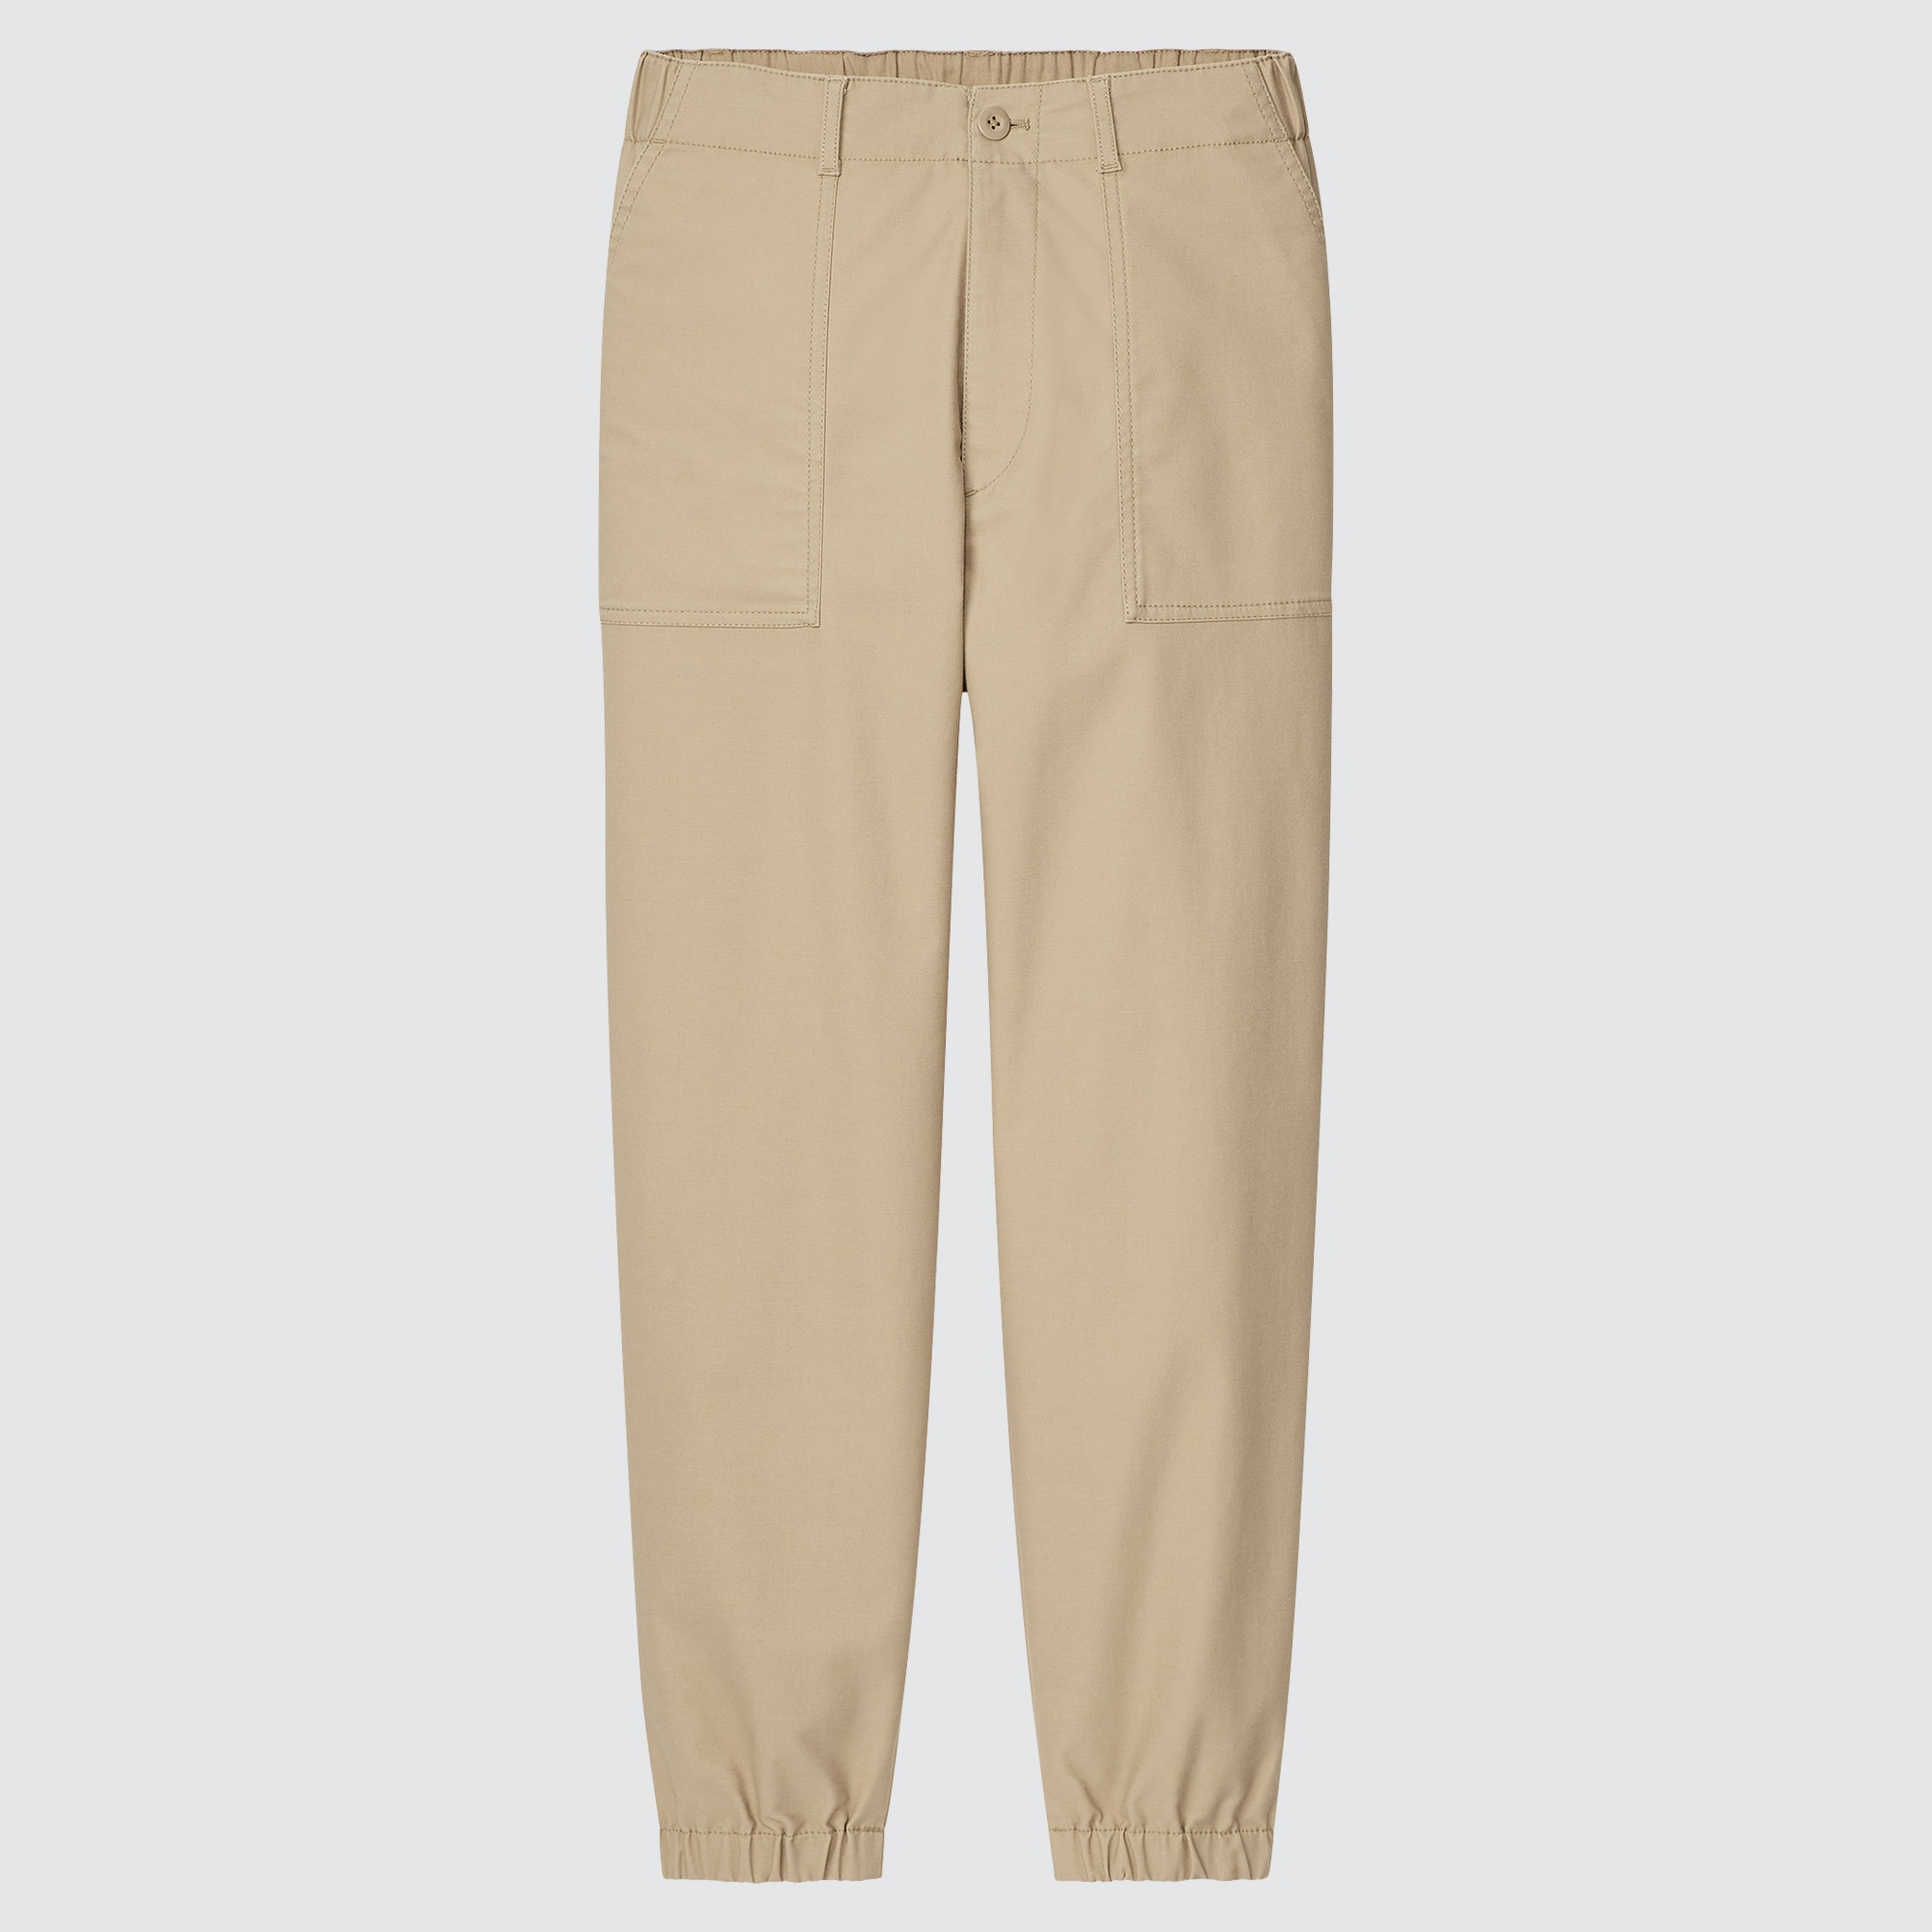 FR 88/12 Cotton Blend Pants - Commercial Workwear | Flame Resistant Workwear